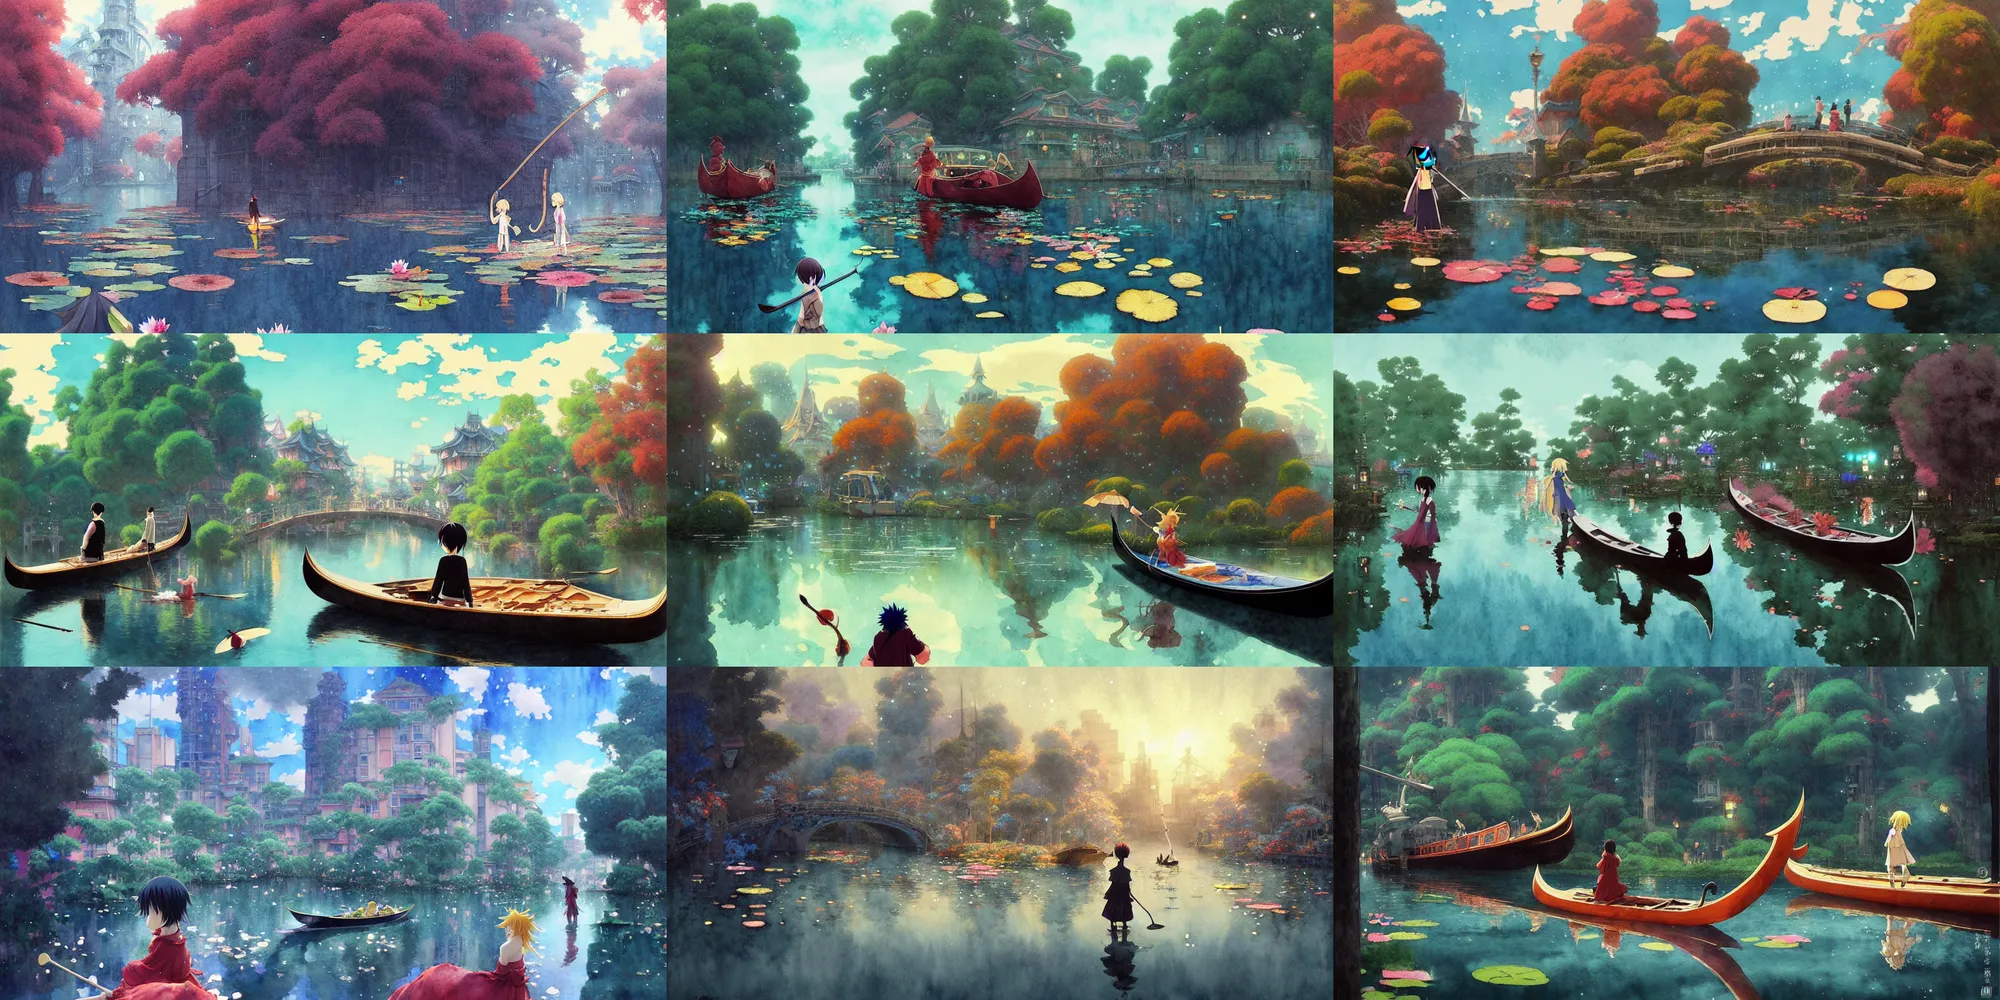 Prompt: anime movie scene, characters, waterway, fantasy. gondola boat, amazing composition, colorful watercolor, lily pads, reflections, by ruan jia, by maxfield parrish, by koji morimoto, by hikari shimoda, by sparth, by zhang kechun, illustration, gloomy, colossal ant statues!!!!, winter